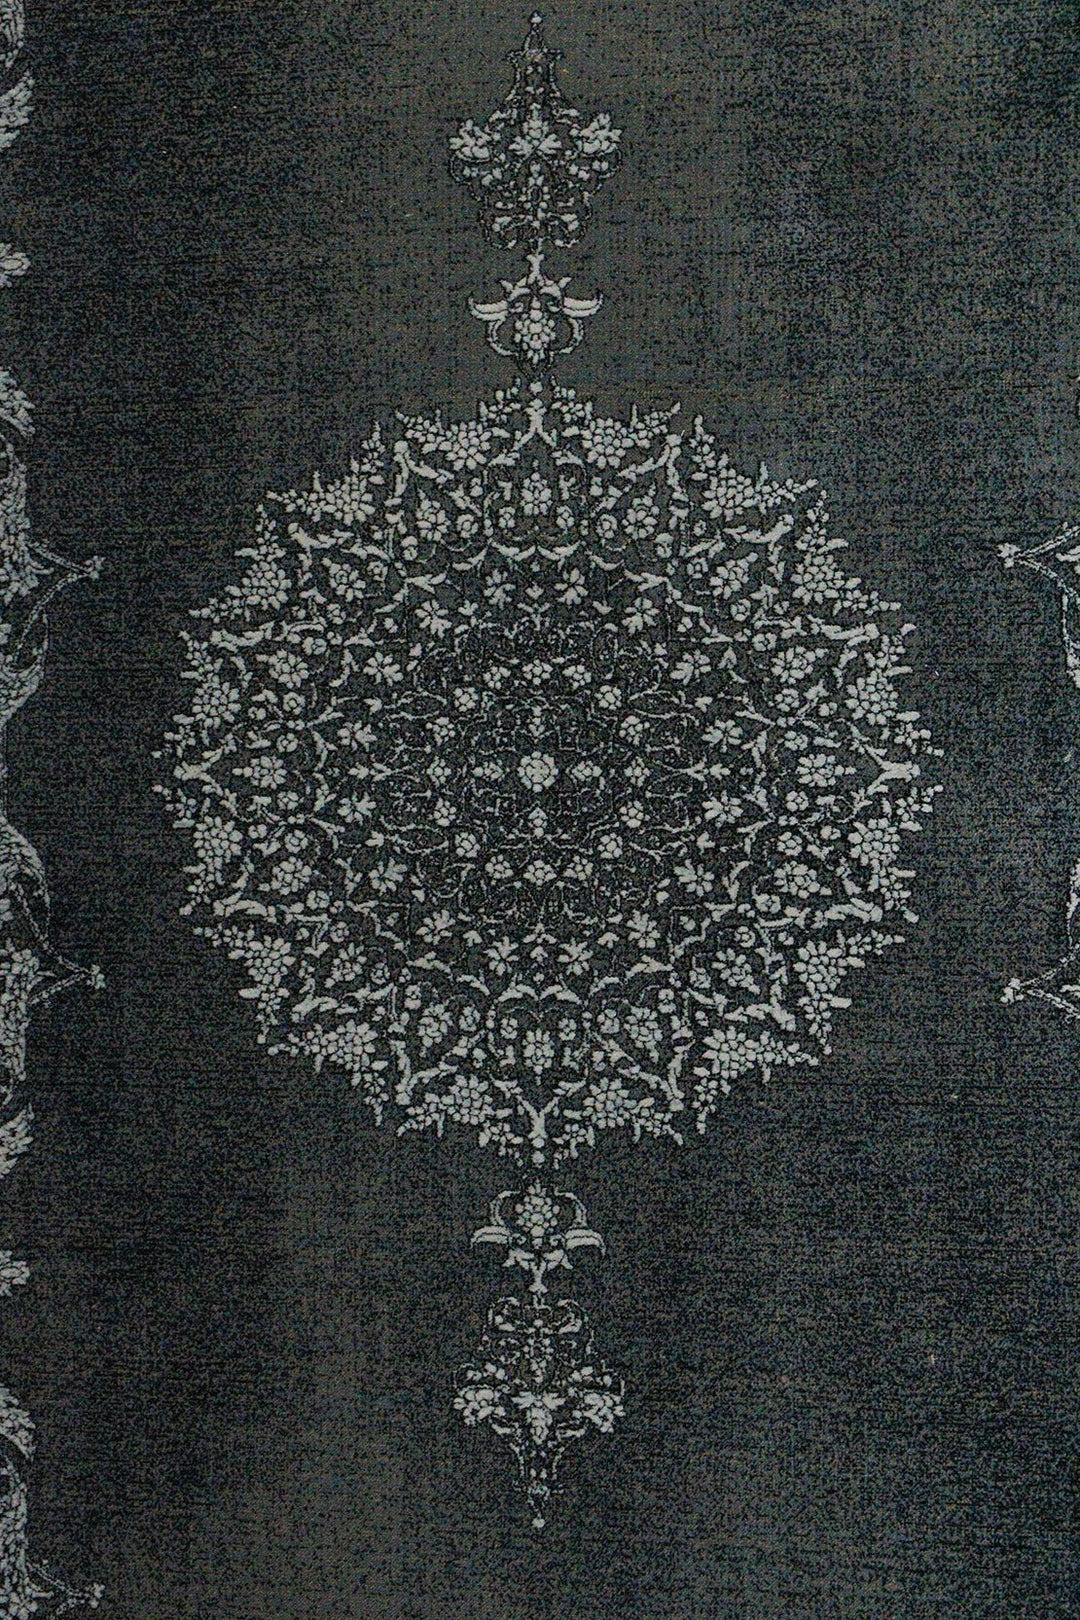 Iranian Premium Quality Oriental Collection Rug - 3.2 x 9.8 FT - Gray - Resilient Construction for Long-Lasting Use - V Surfaces